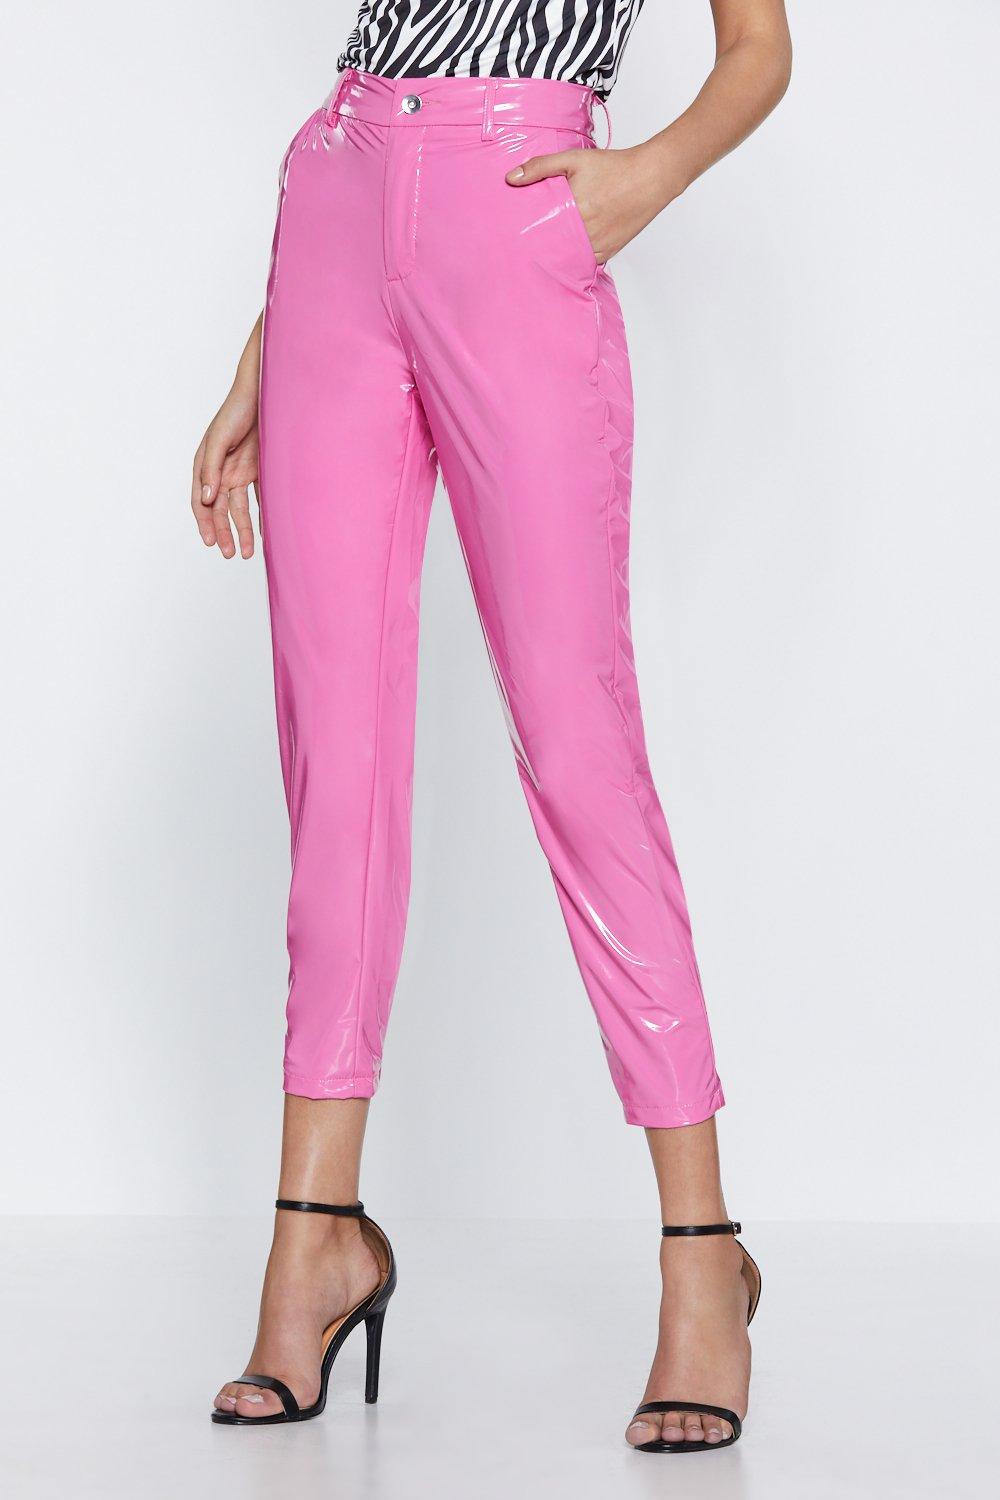 hot pink faux leather pants